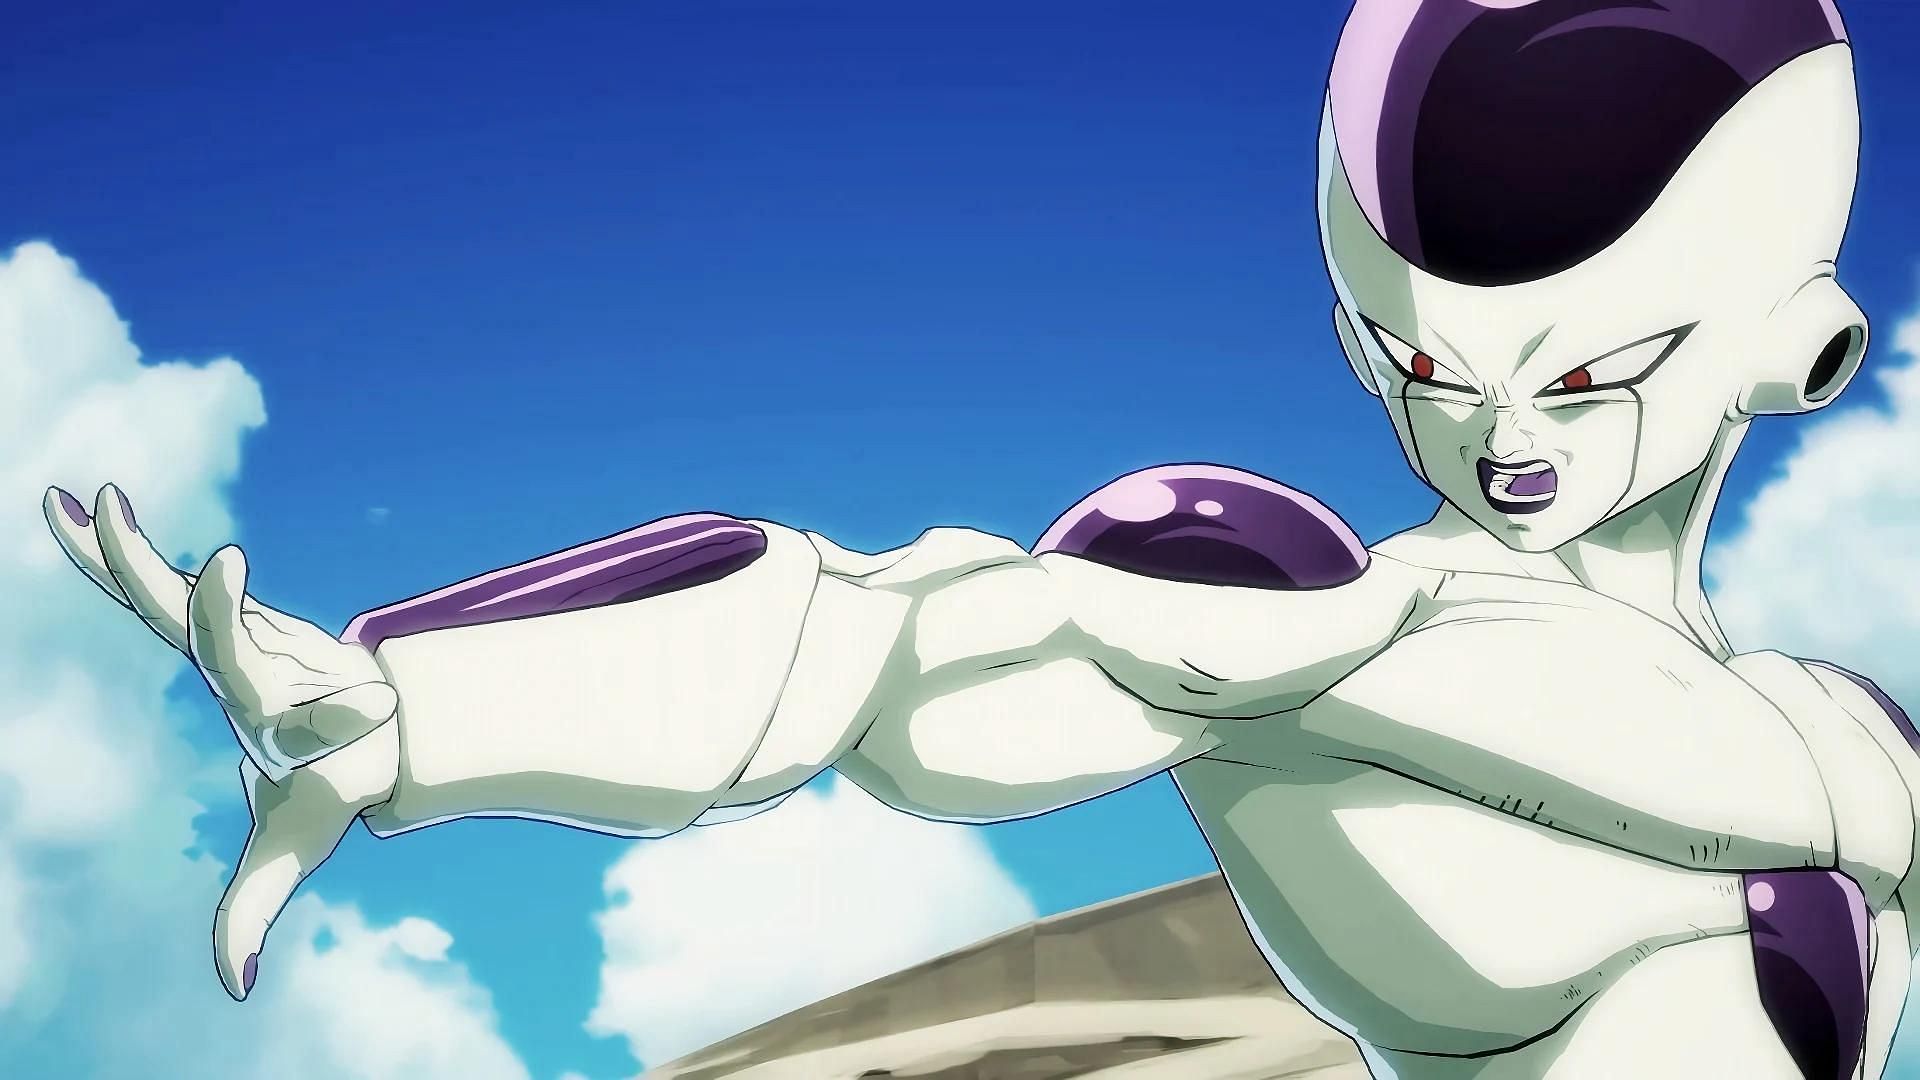 Possibility of Frieza